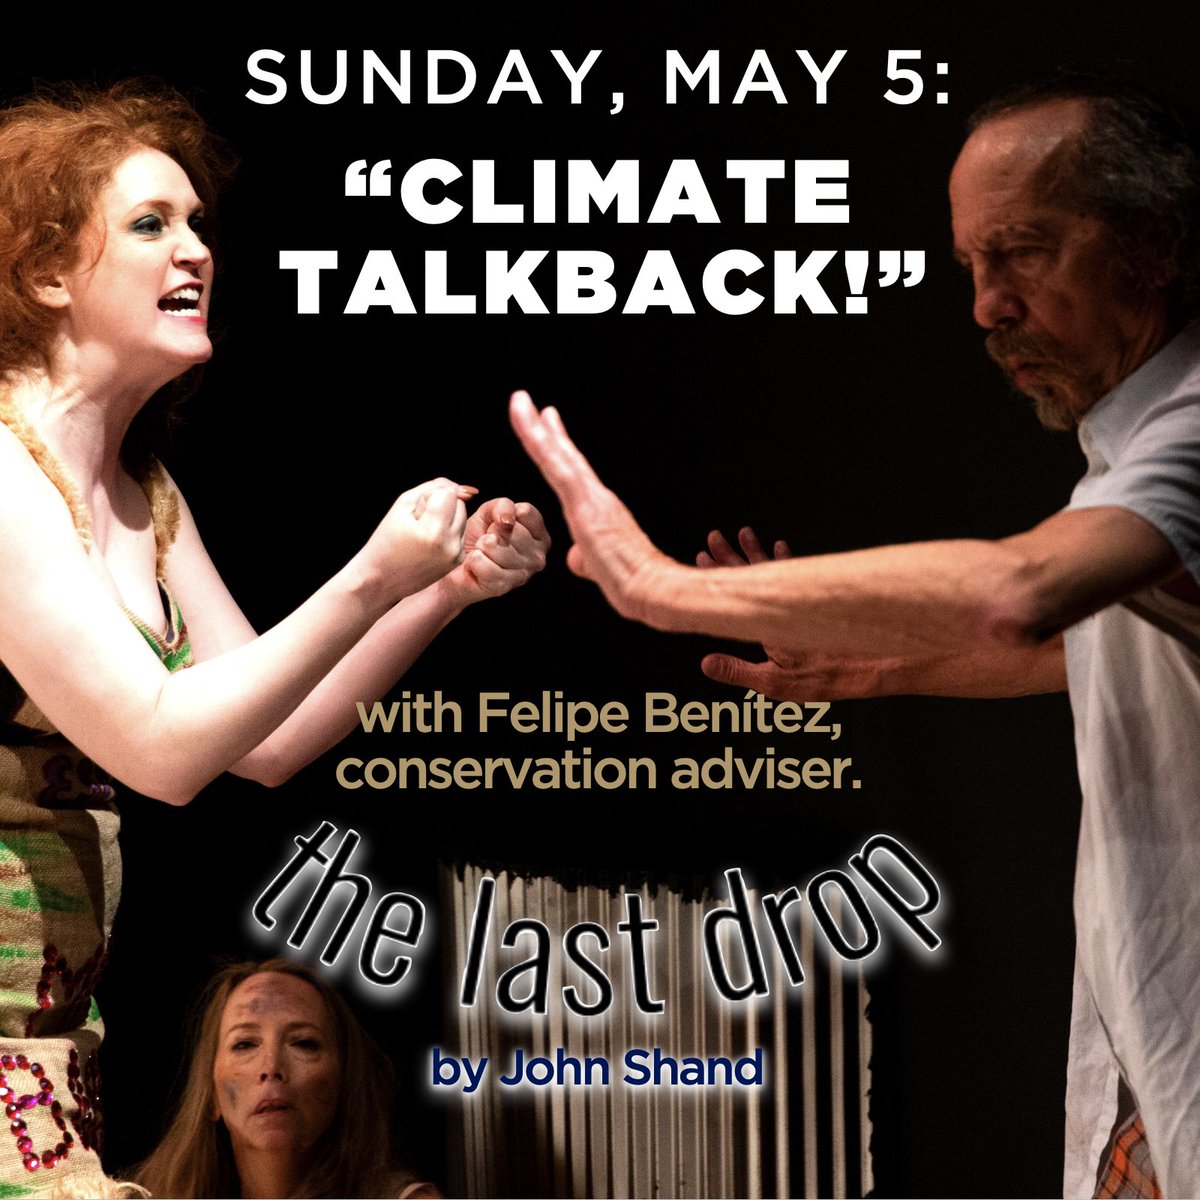 Sunday after #TheLastDrop join a vigorous Talkback on climate & conservation. Guest @fbenitezdc of @corazon_latin  advises global leaders on sustainability & communications. He'll engage director @Bobilenko, the cast & audience on the #climatecrisis. TIX ScenaTheatre.org